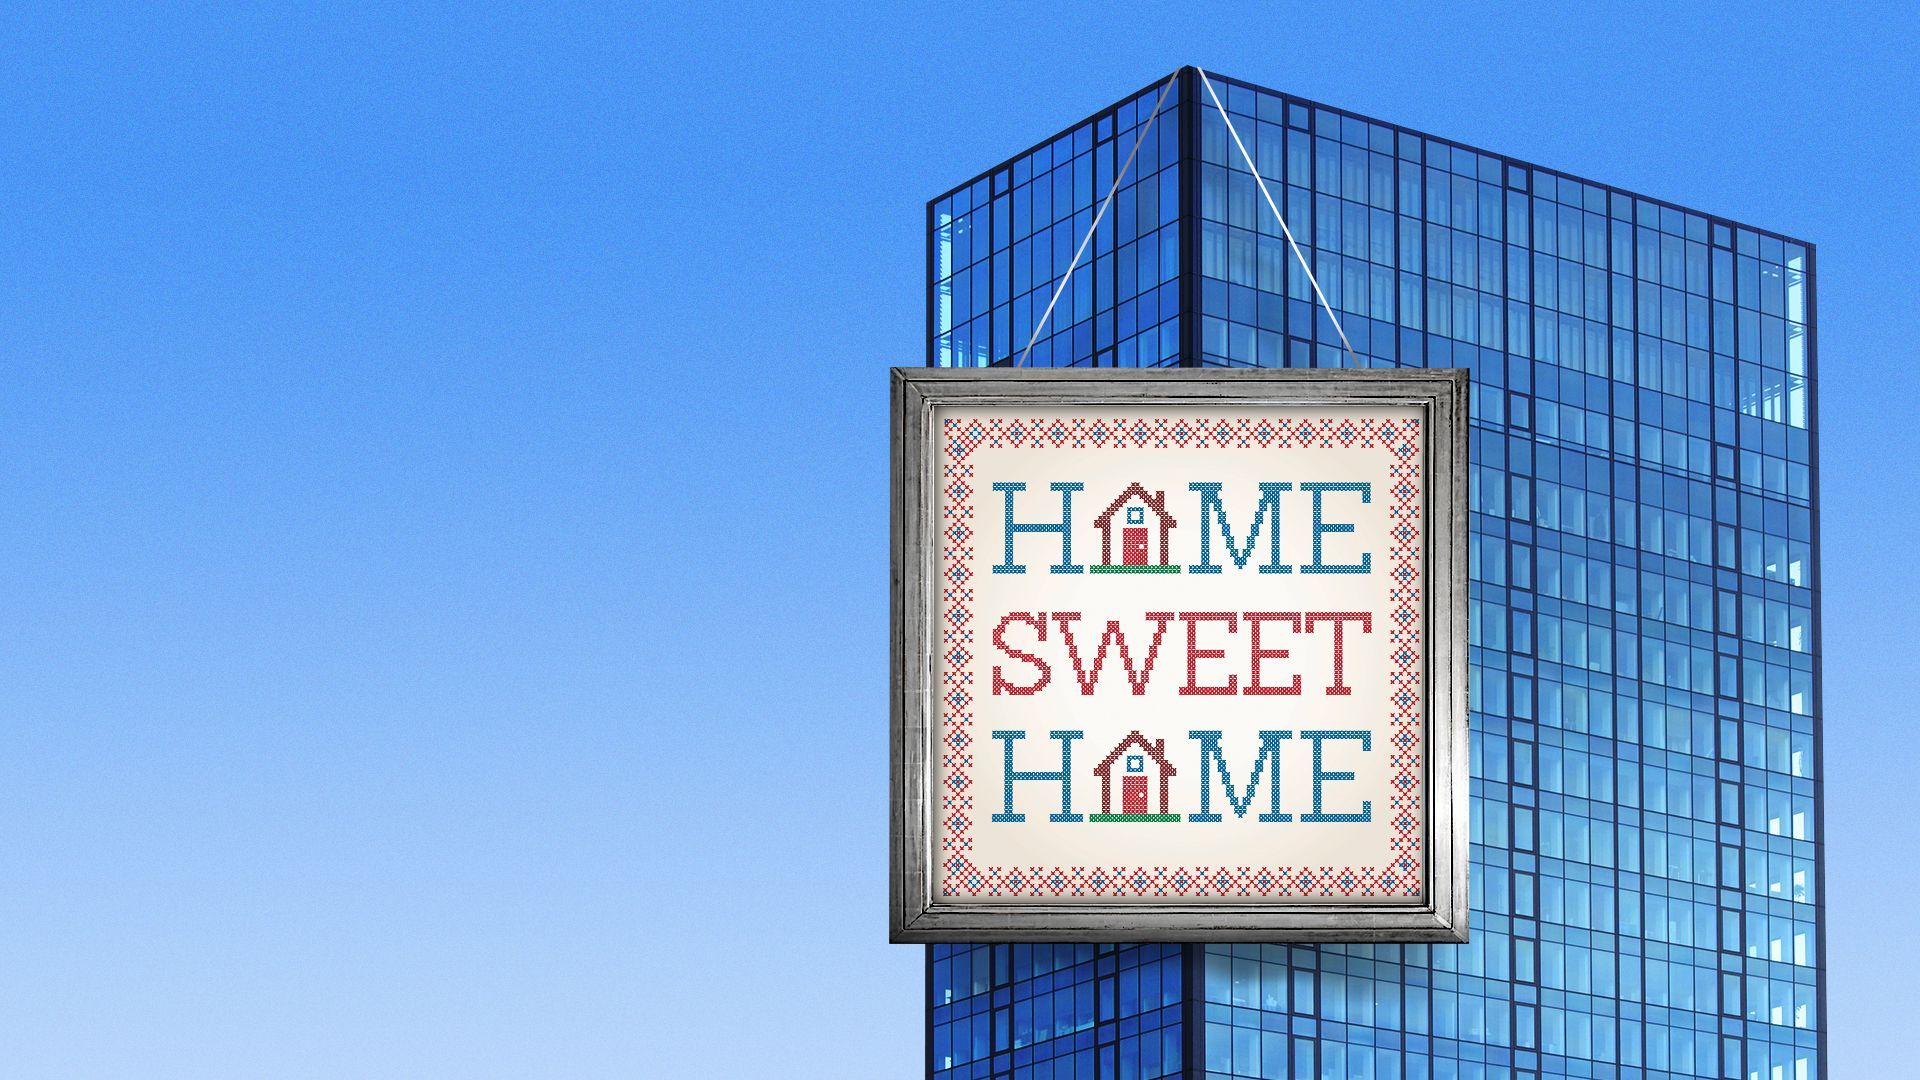 Illustration of a high-rise office building with an oversized "Home sweet home" embroidery piece framed and hanging from the roof